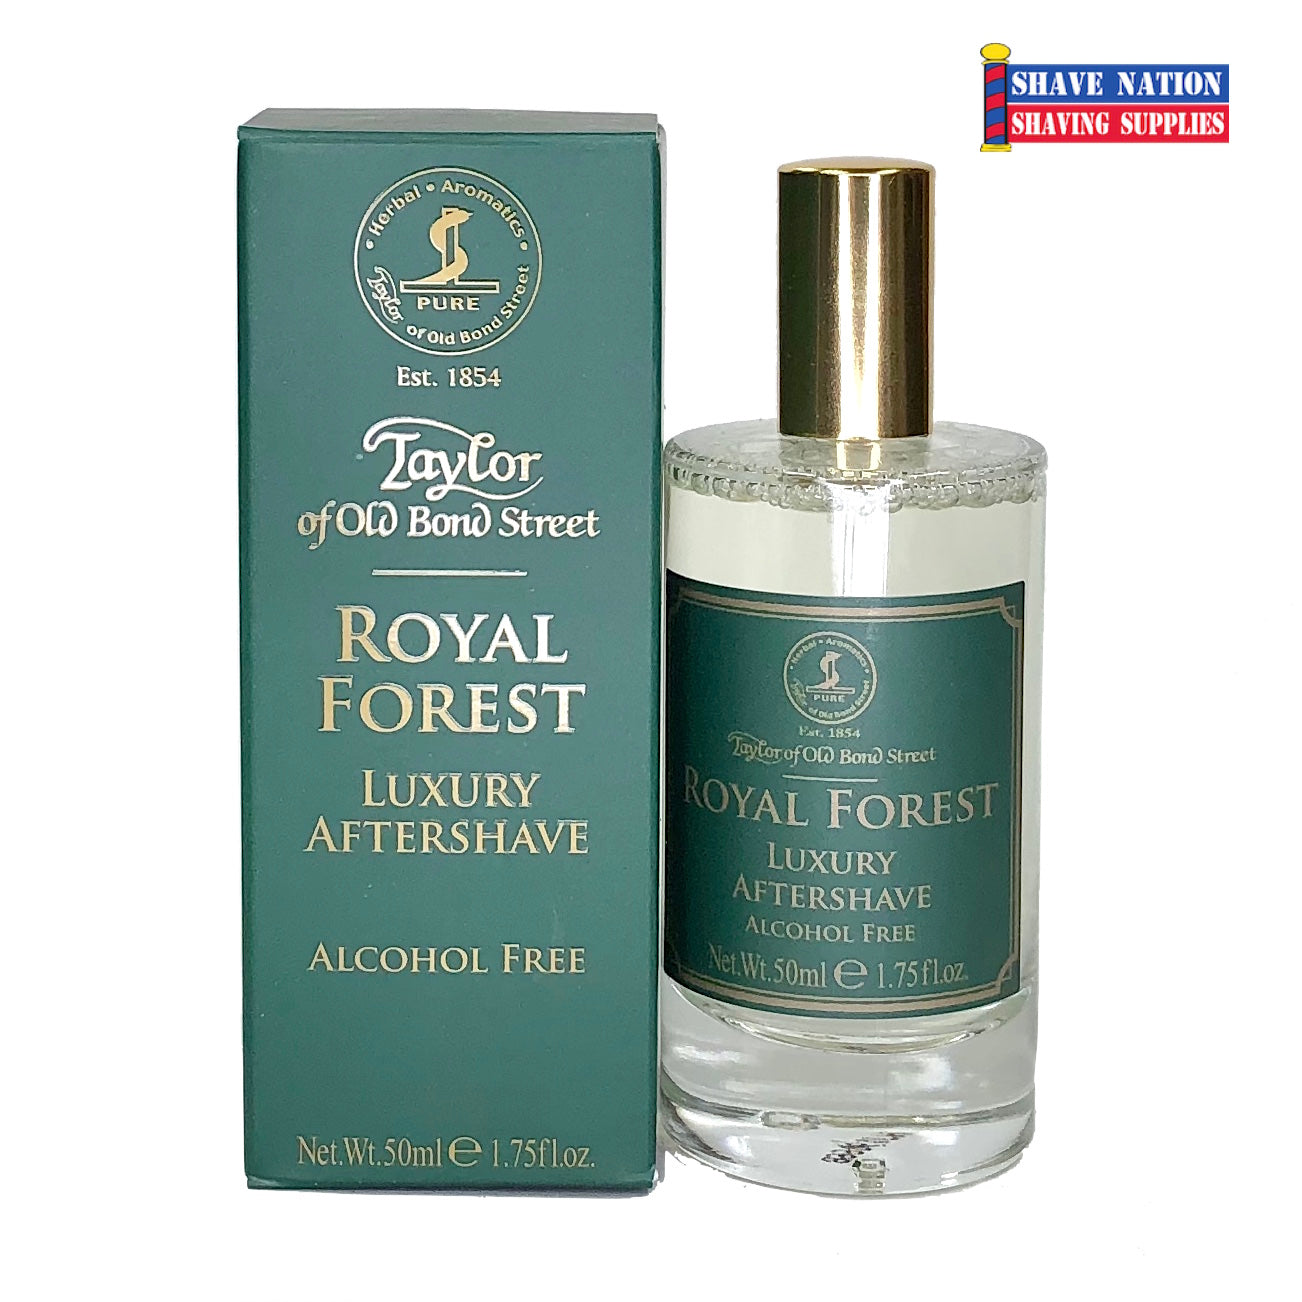 Street Forest Taylor Royal Luxury Aftershave Shave | of Free Shaving (Alcohol Old Bond Supplies® Nation